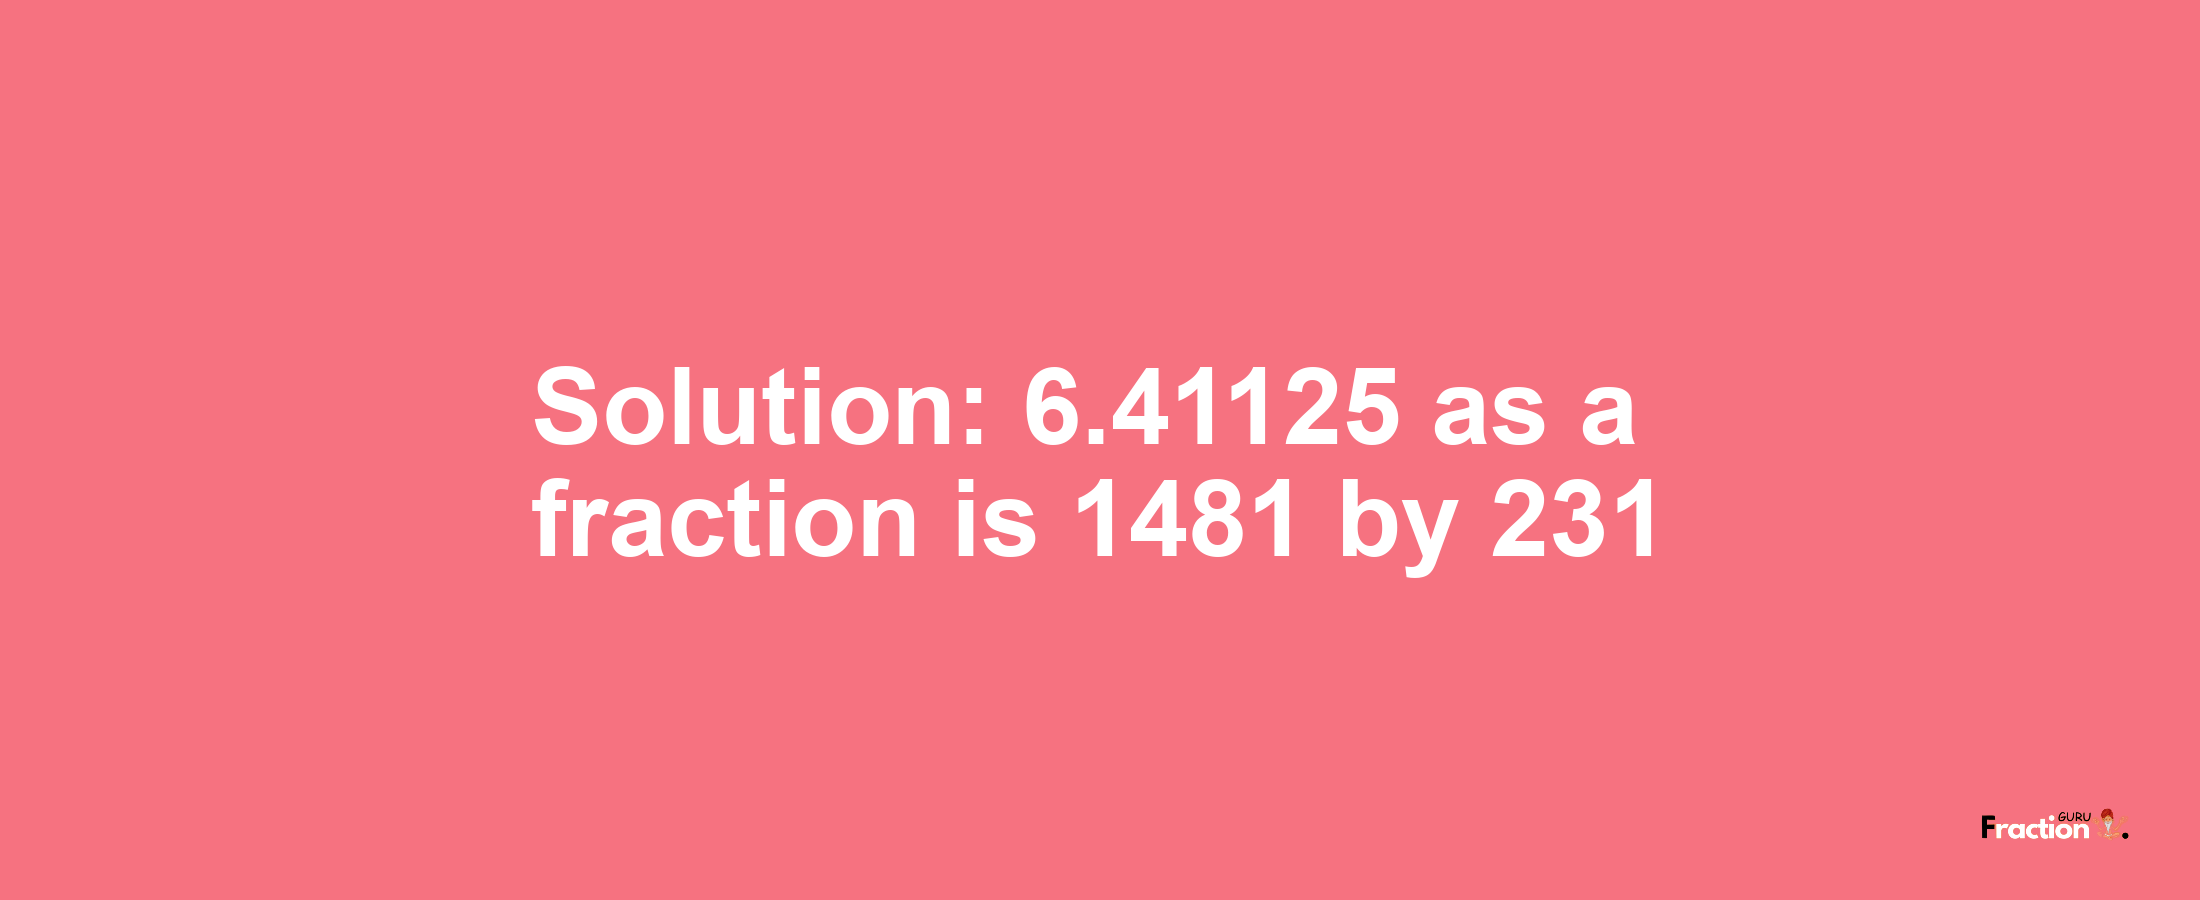 Solution:6.41125 as a fraction is 1481/231